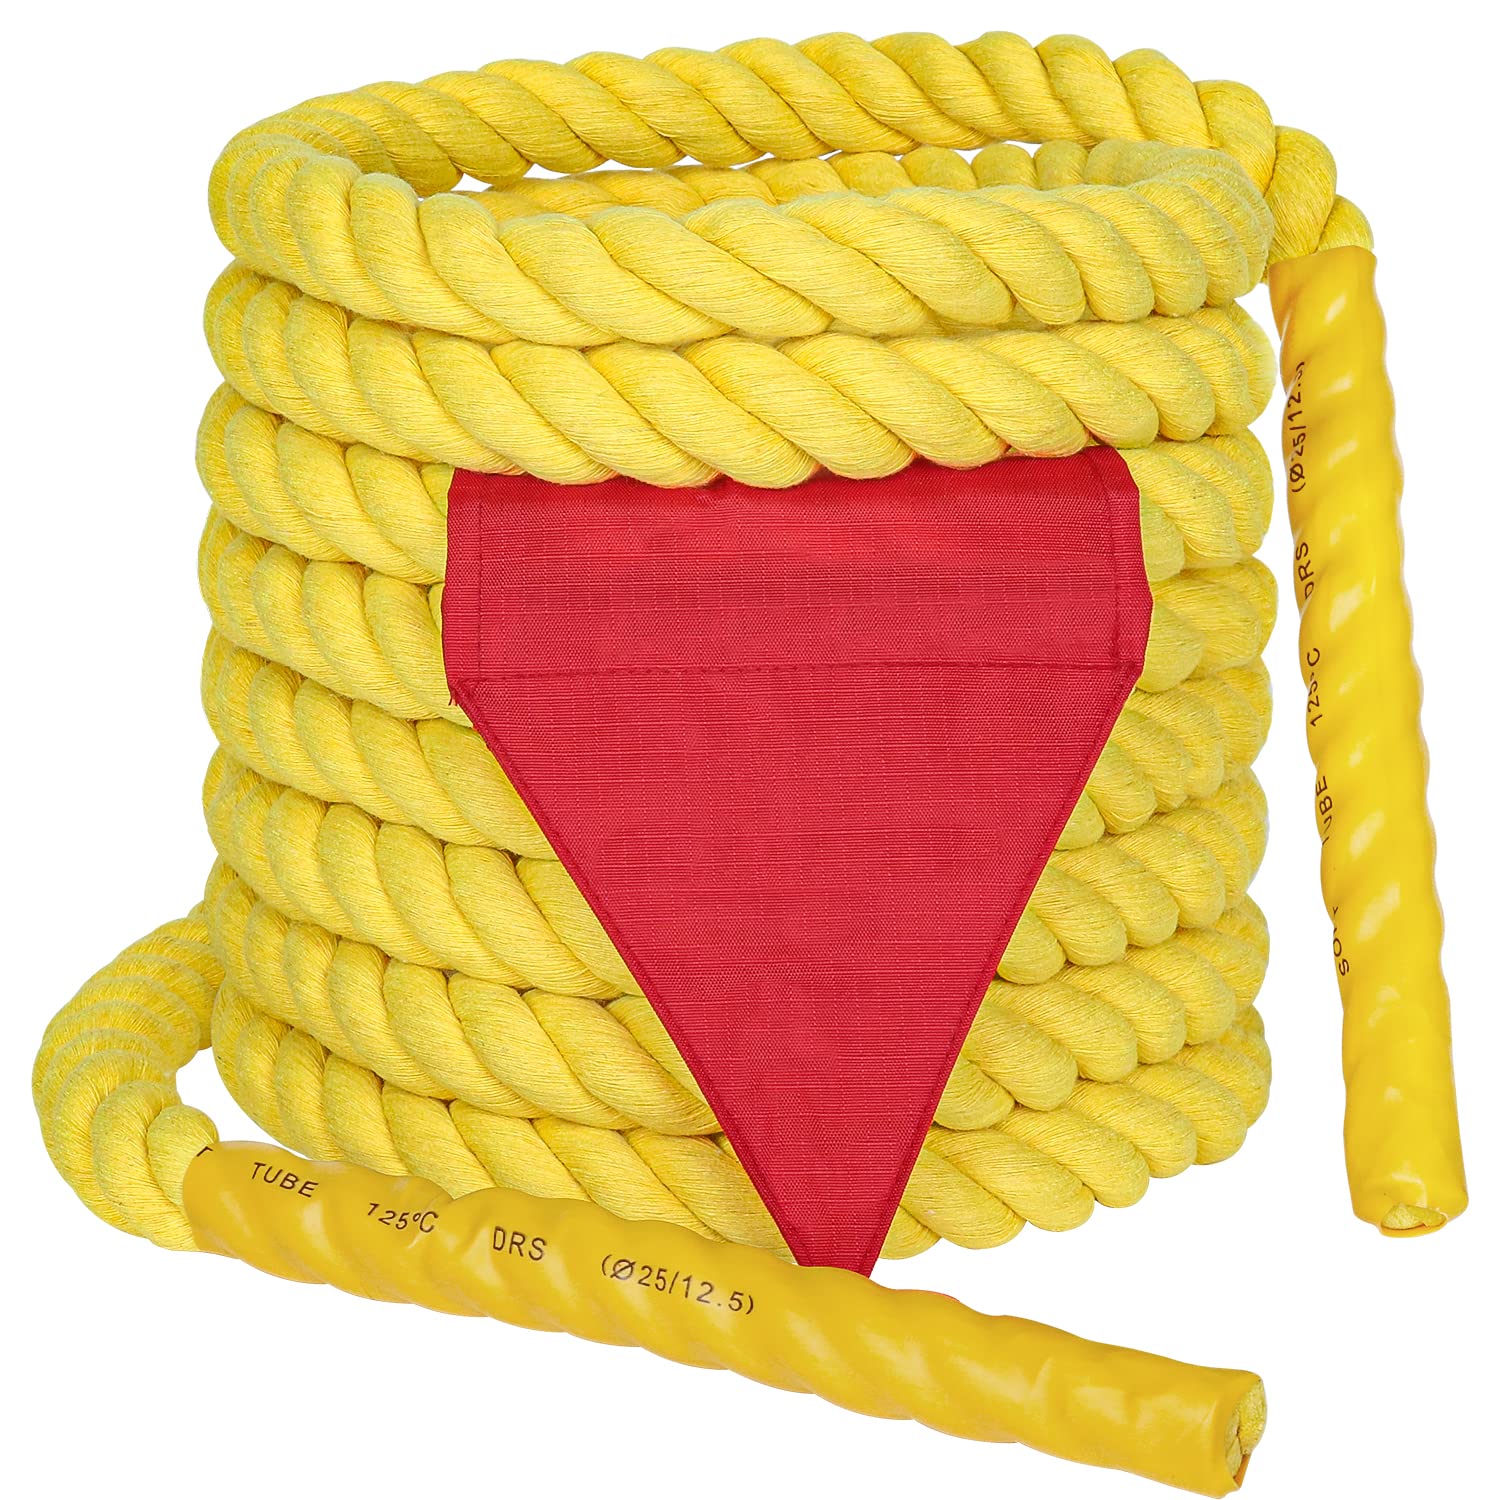 X XBEN Tug of War Rope with Flag for Kids, Teens and Adults, Soft Cotton  Rope Games for Team Building Activities, Family Reunion, Birthday  Party-20FT Bright Yellow 20 Feet